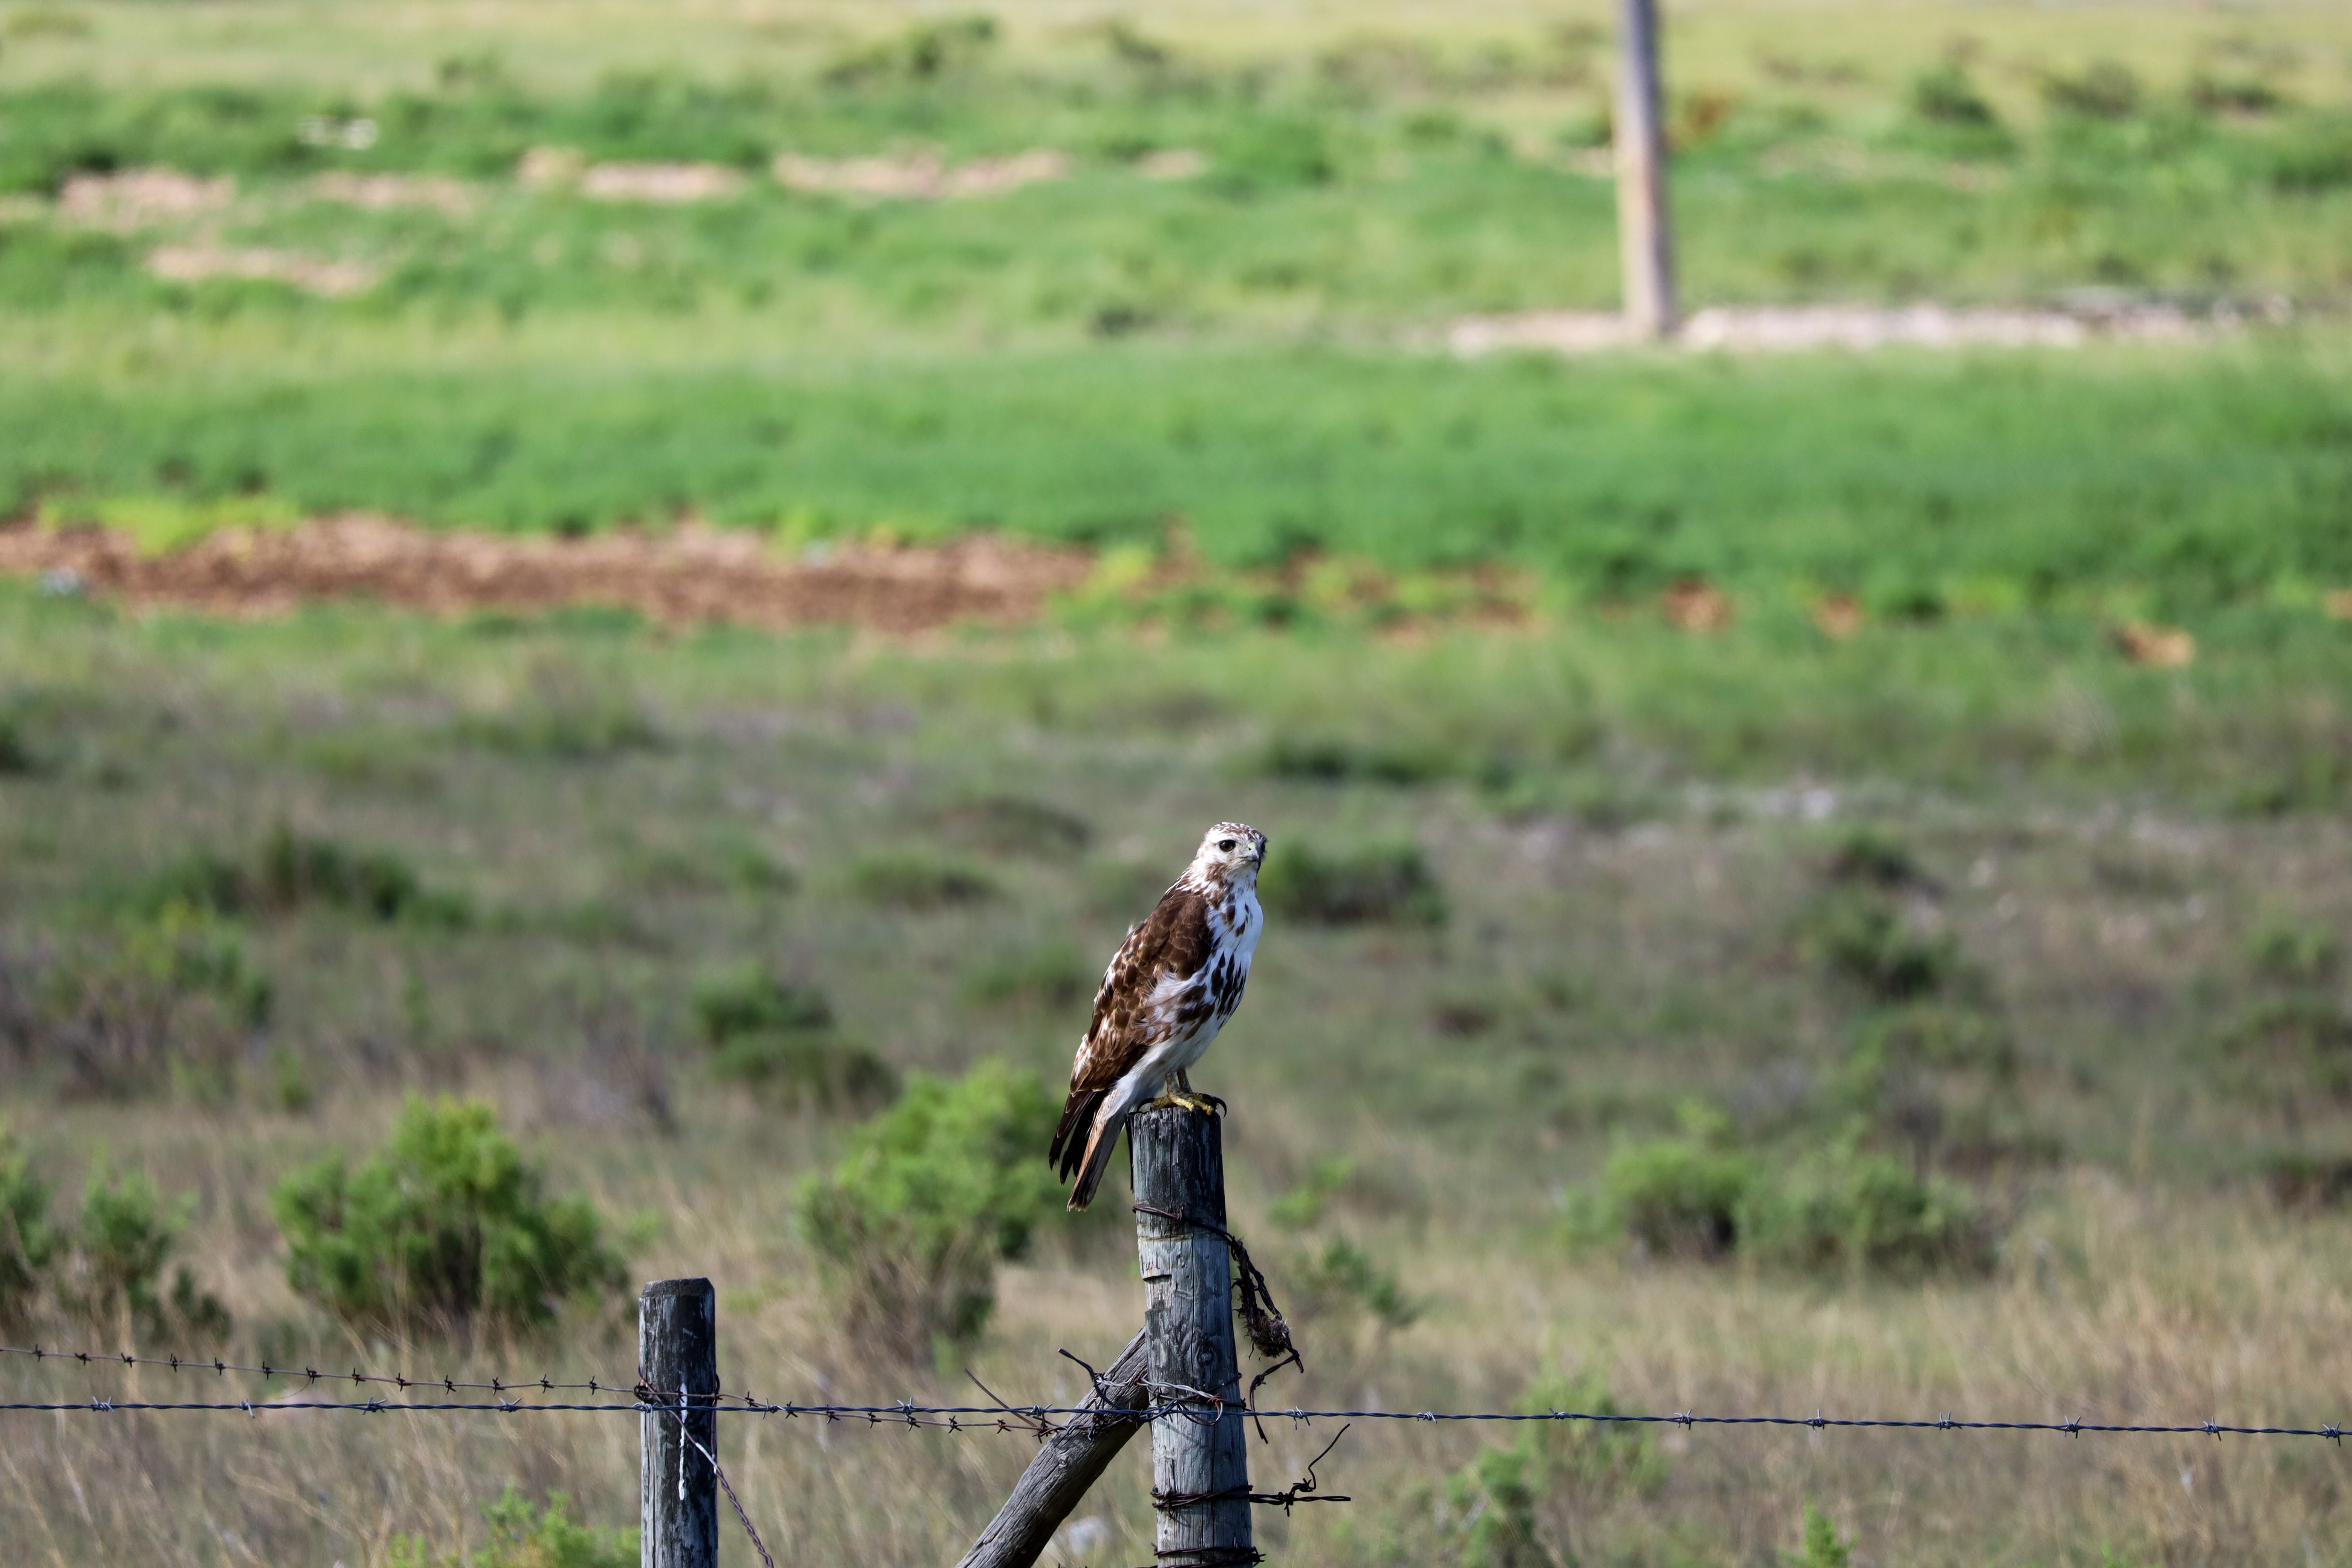 A hawk sits on a fence with a grassy field in the background 